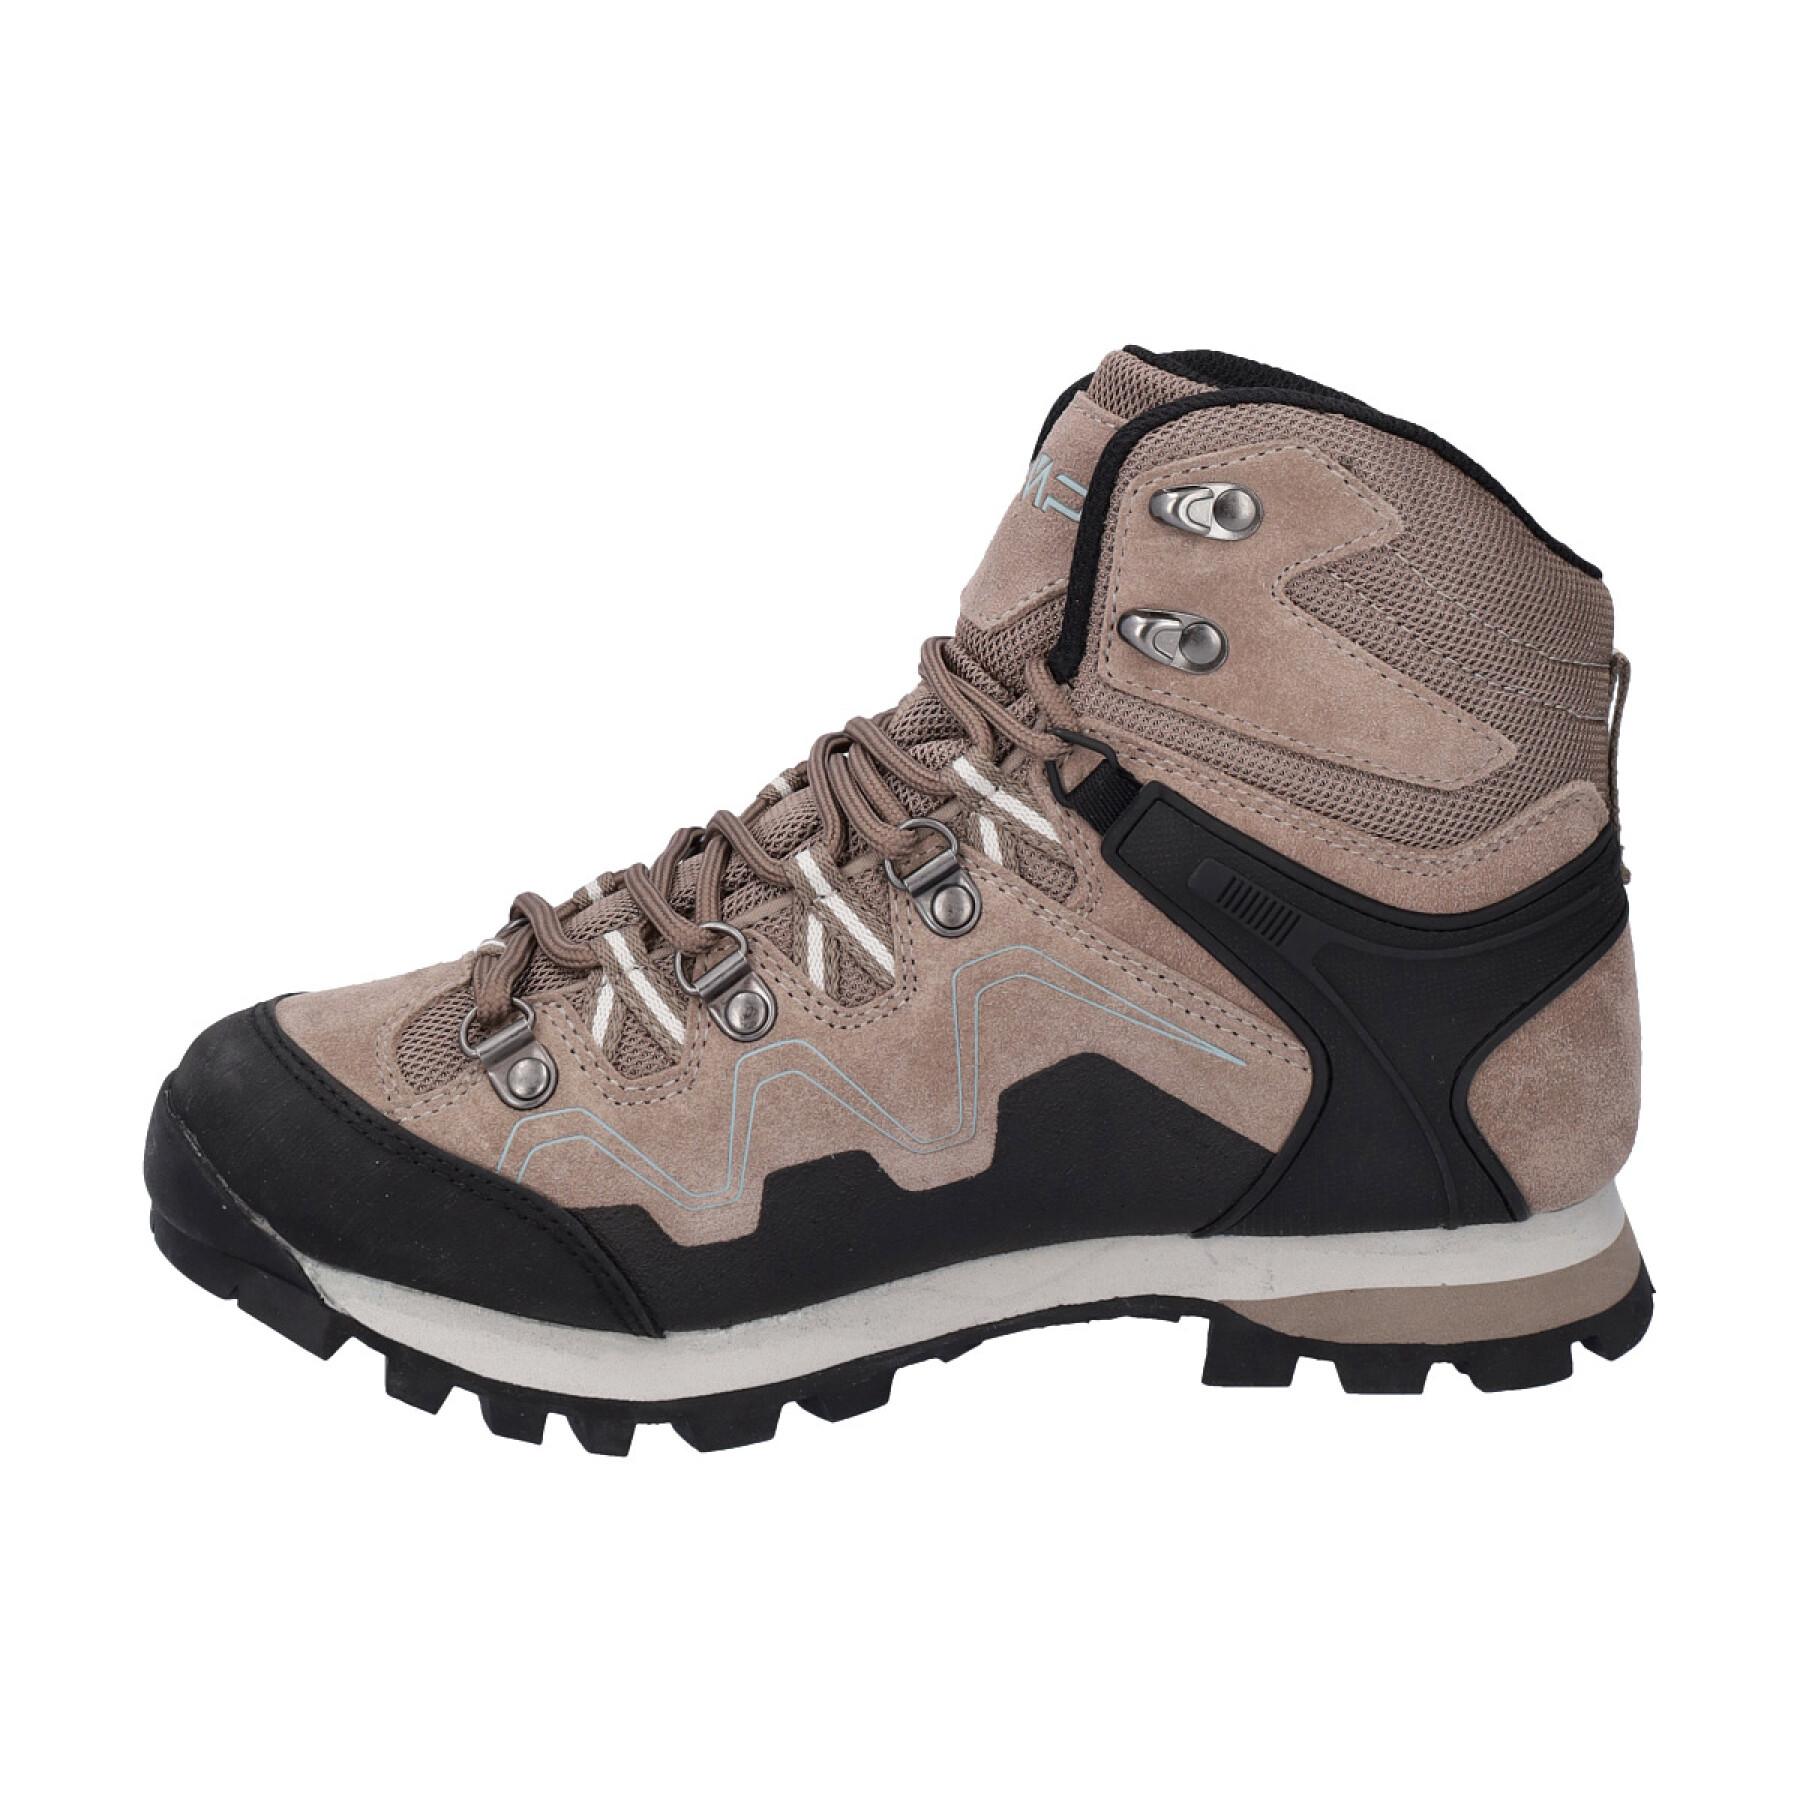 Mid hiking shoes for women CMP Athunis WP